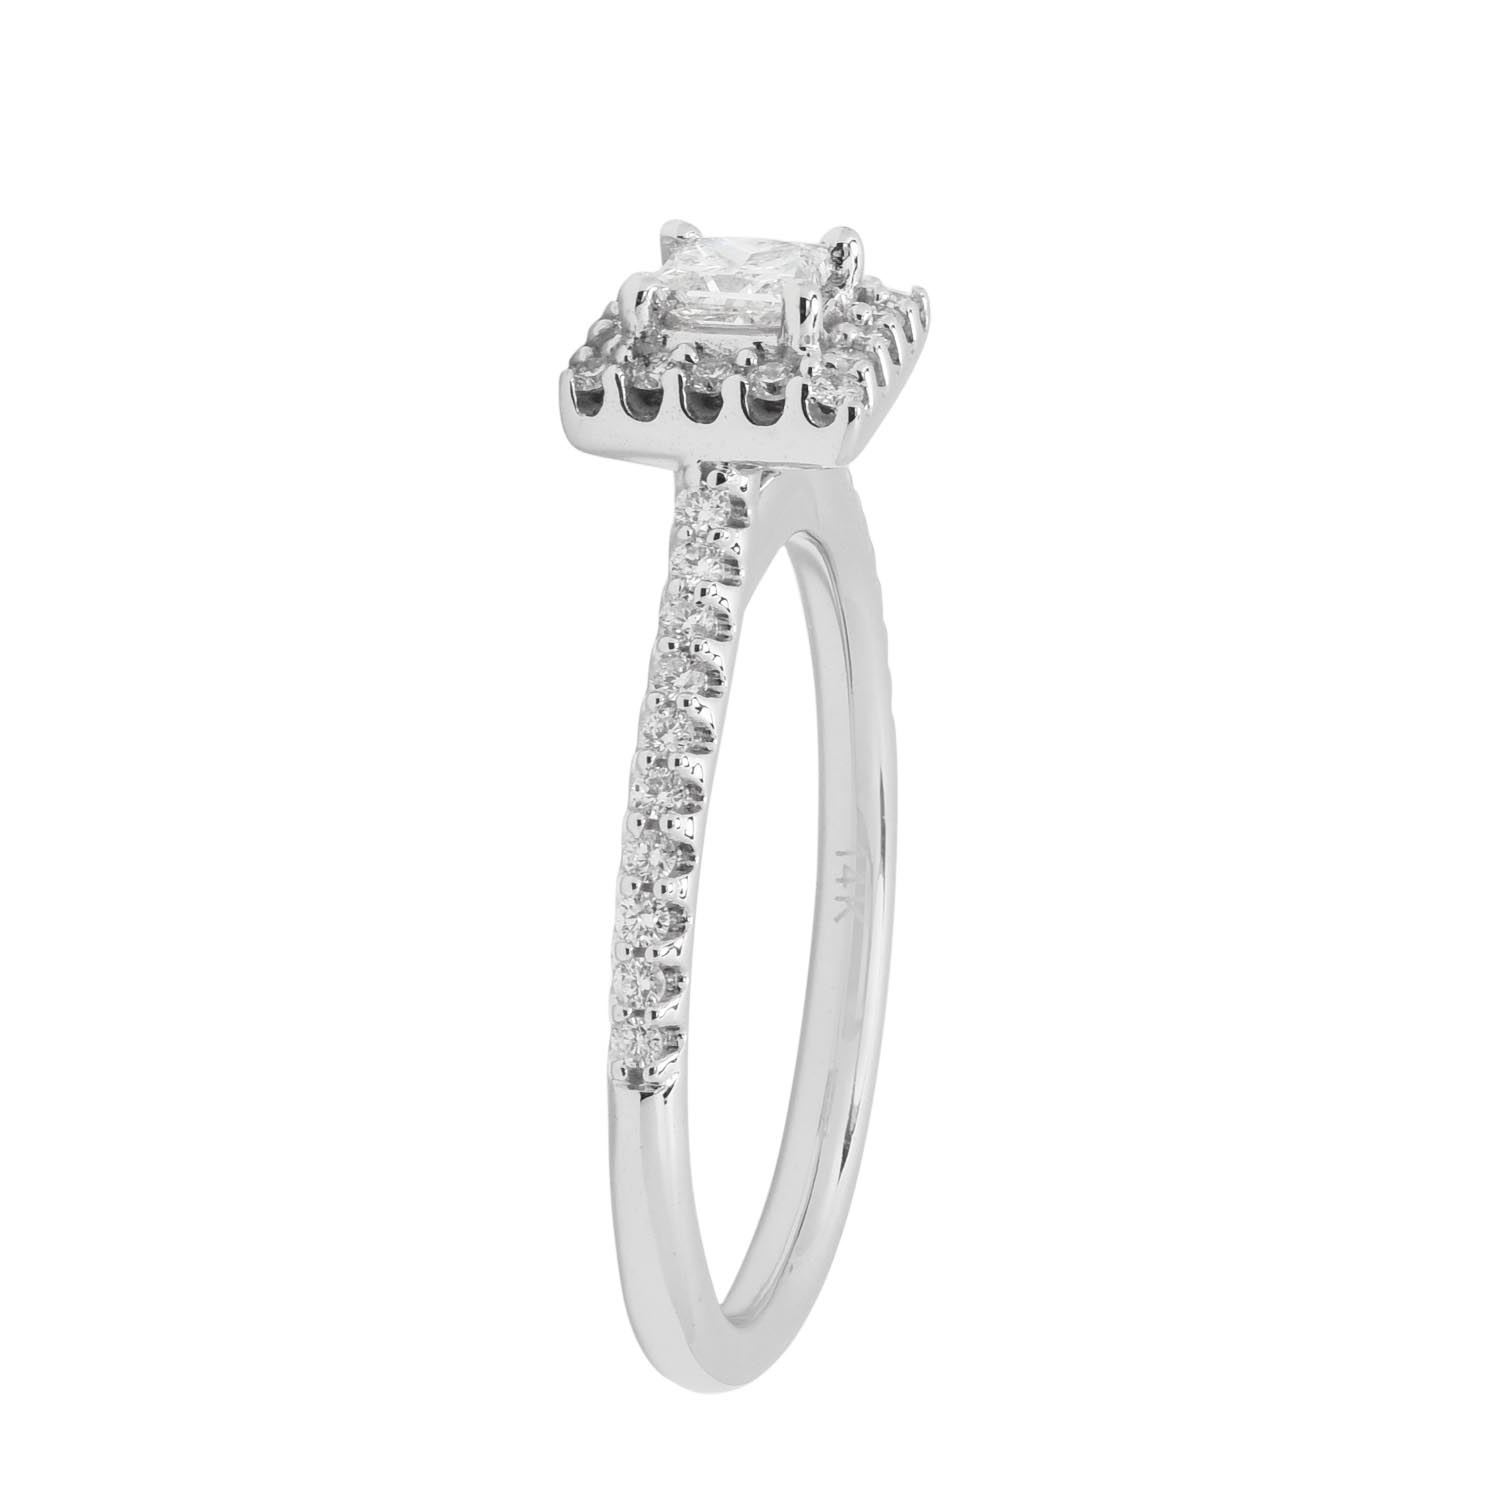 Princess Cut Diamond Halo Ring in 14kt White Gold (1/2ct tw)